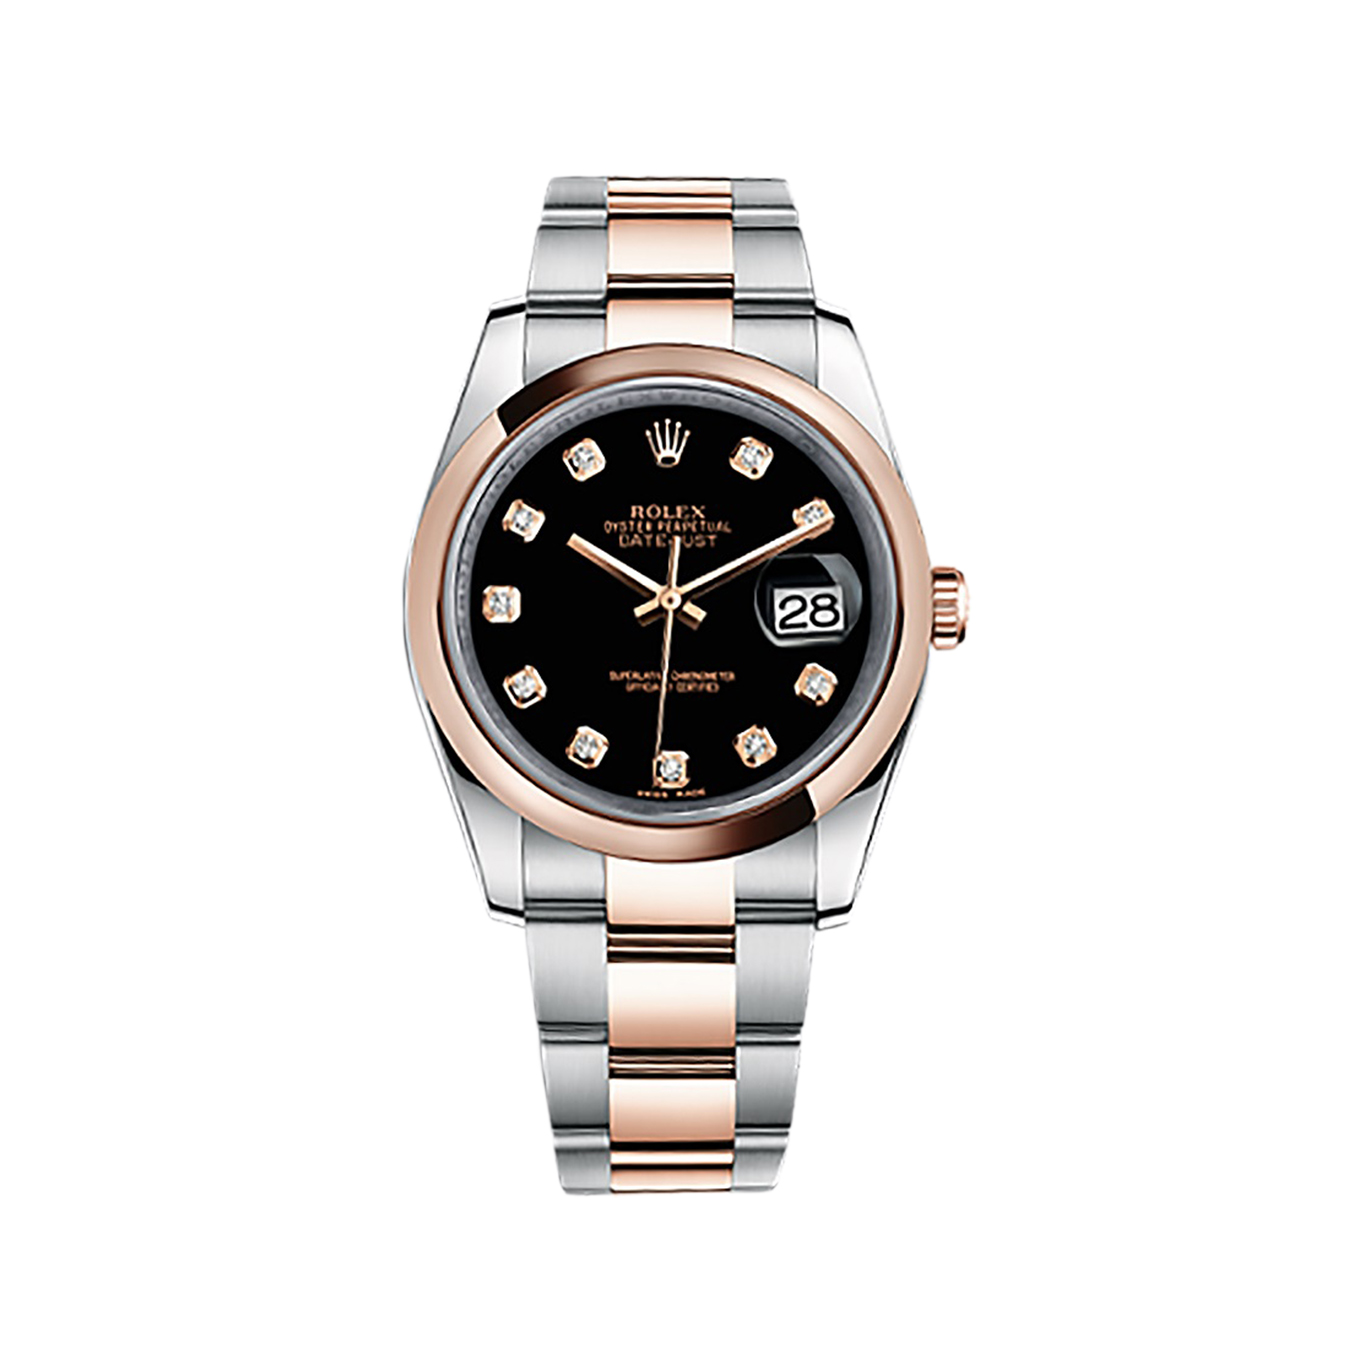 Datejust 36 116201 Rose Gold & Stainless Steel Watch (Black Set with Diamonds)